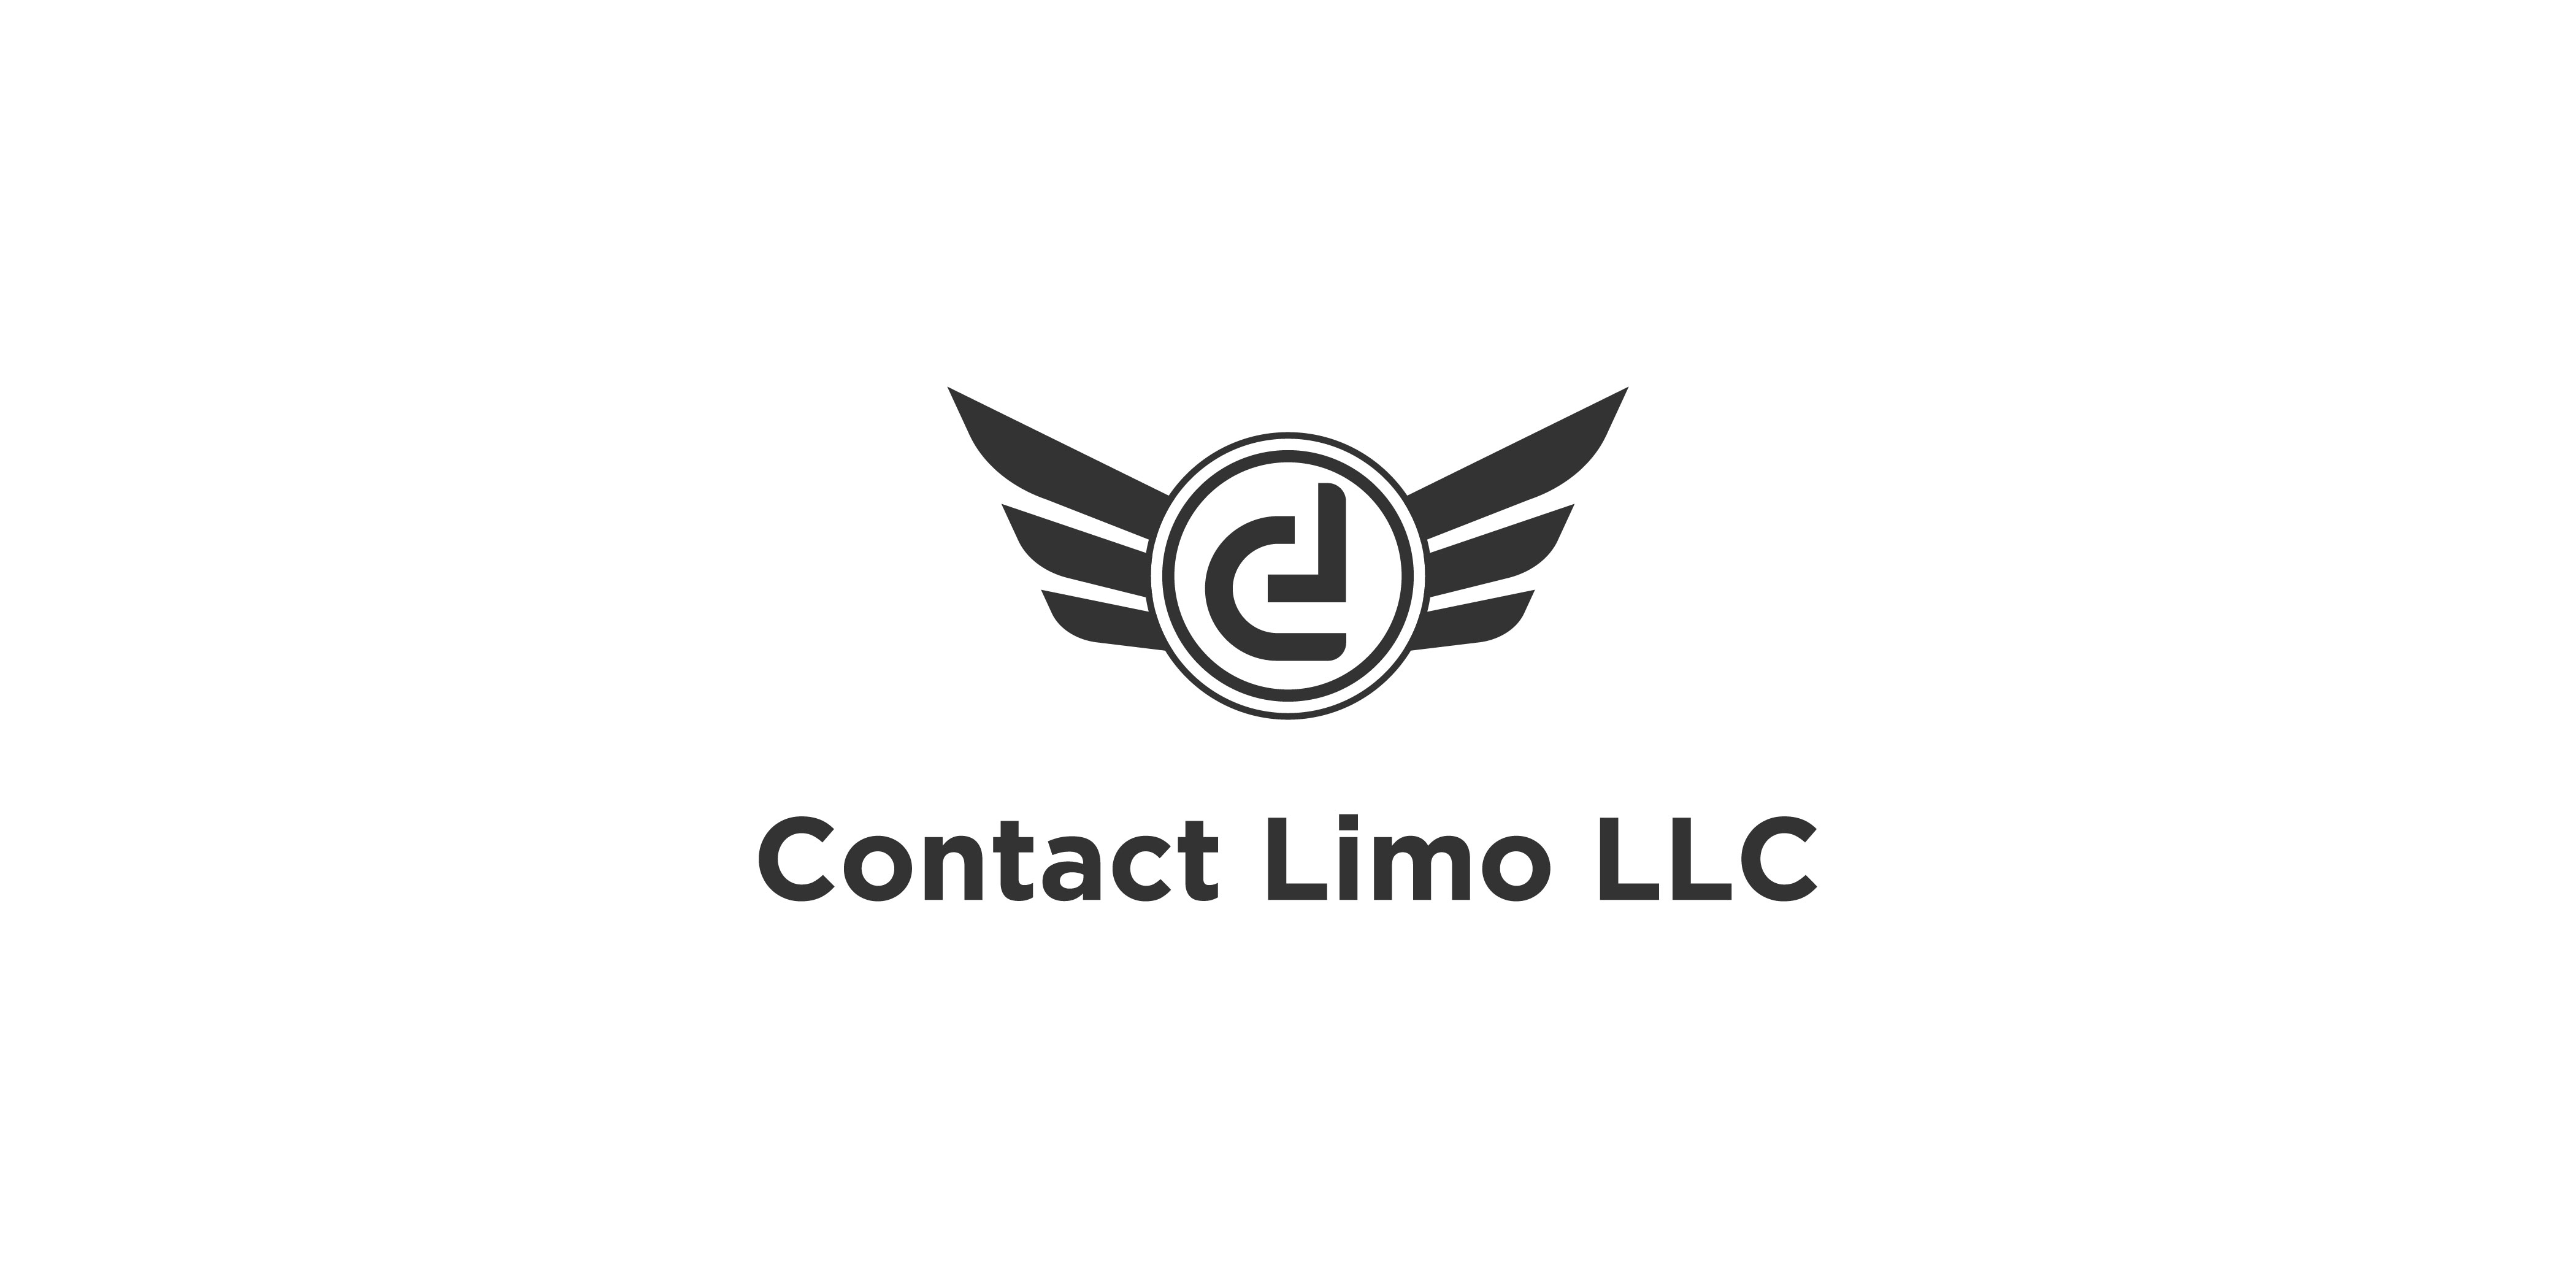 Contact Limo LLC review